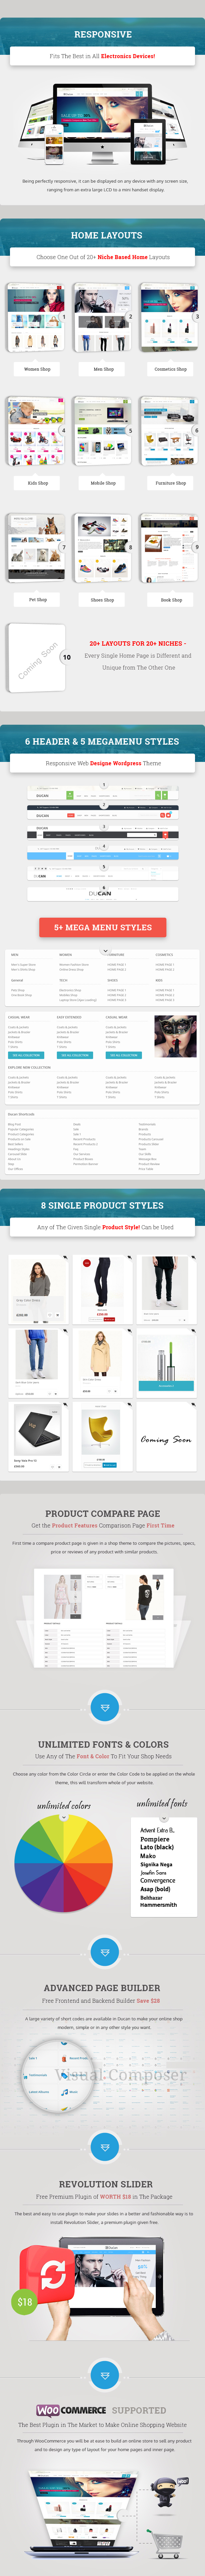 Ducan - Start An Online Store with WooCommerce WP Theme - 1